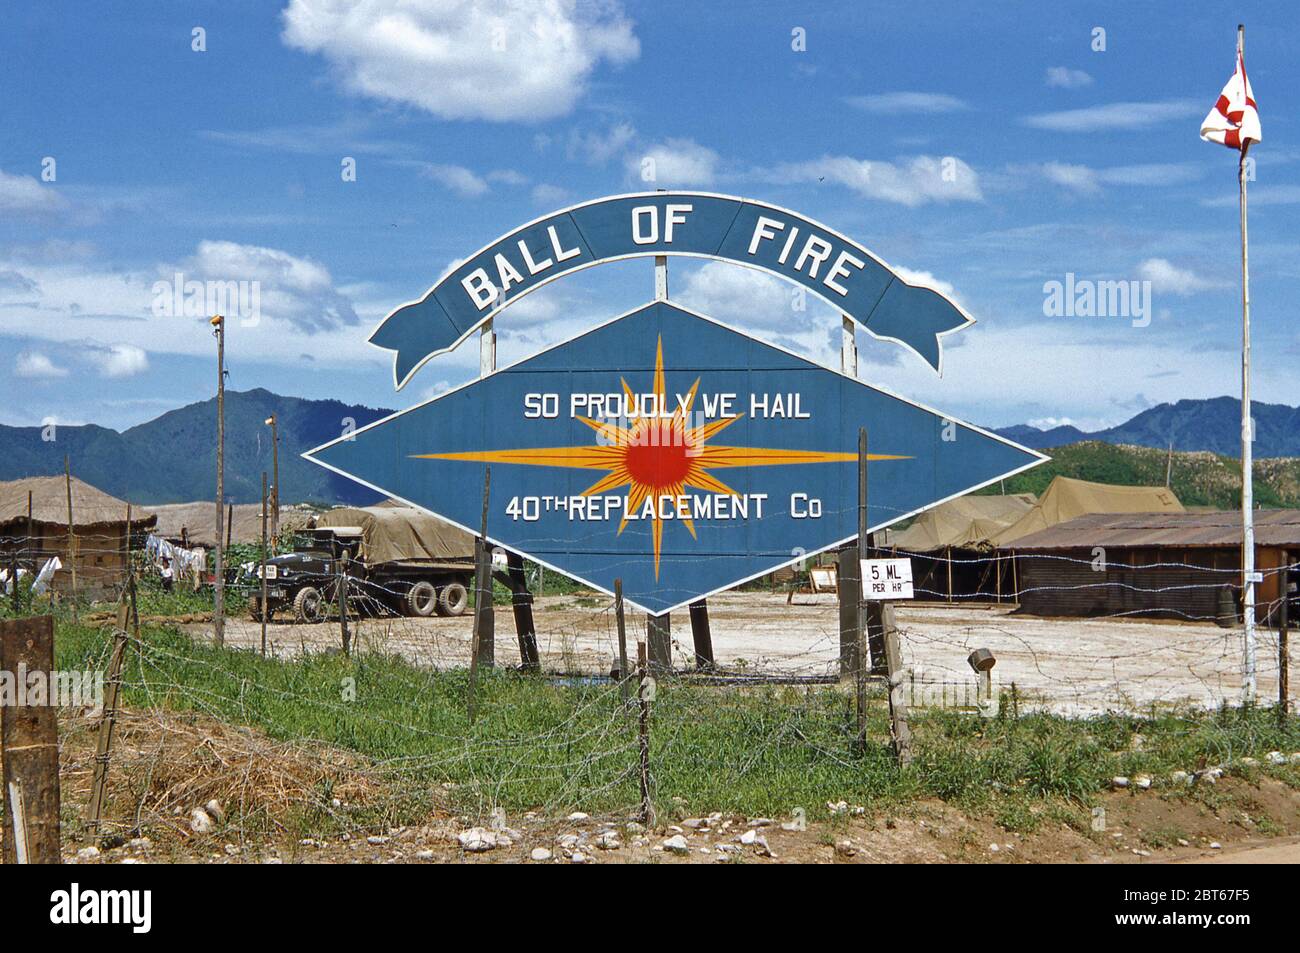 Sign for the US Army's 40th Infantry, Division Replacement Company 1953, just after the Korean War was over. The name 'Ball of Fire' was a fairly short-lived and the division became known as 'The Grizzly Division'. The 40th Infantry Division ('Sunshine Division') is part of the US Army.  It saw active service in the Korean War (1950–53), participating in the battles of Sandbag Castle and Heartbreak Ridge. The division remained in Korea until May 1954. In 1953 their HQ moved to Tokyo, then to Yokohama and finally in October to Camp Zama, southwest of Tokyo. Stock Photo